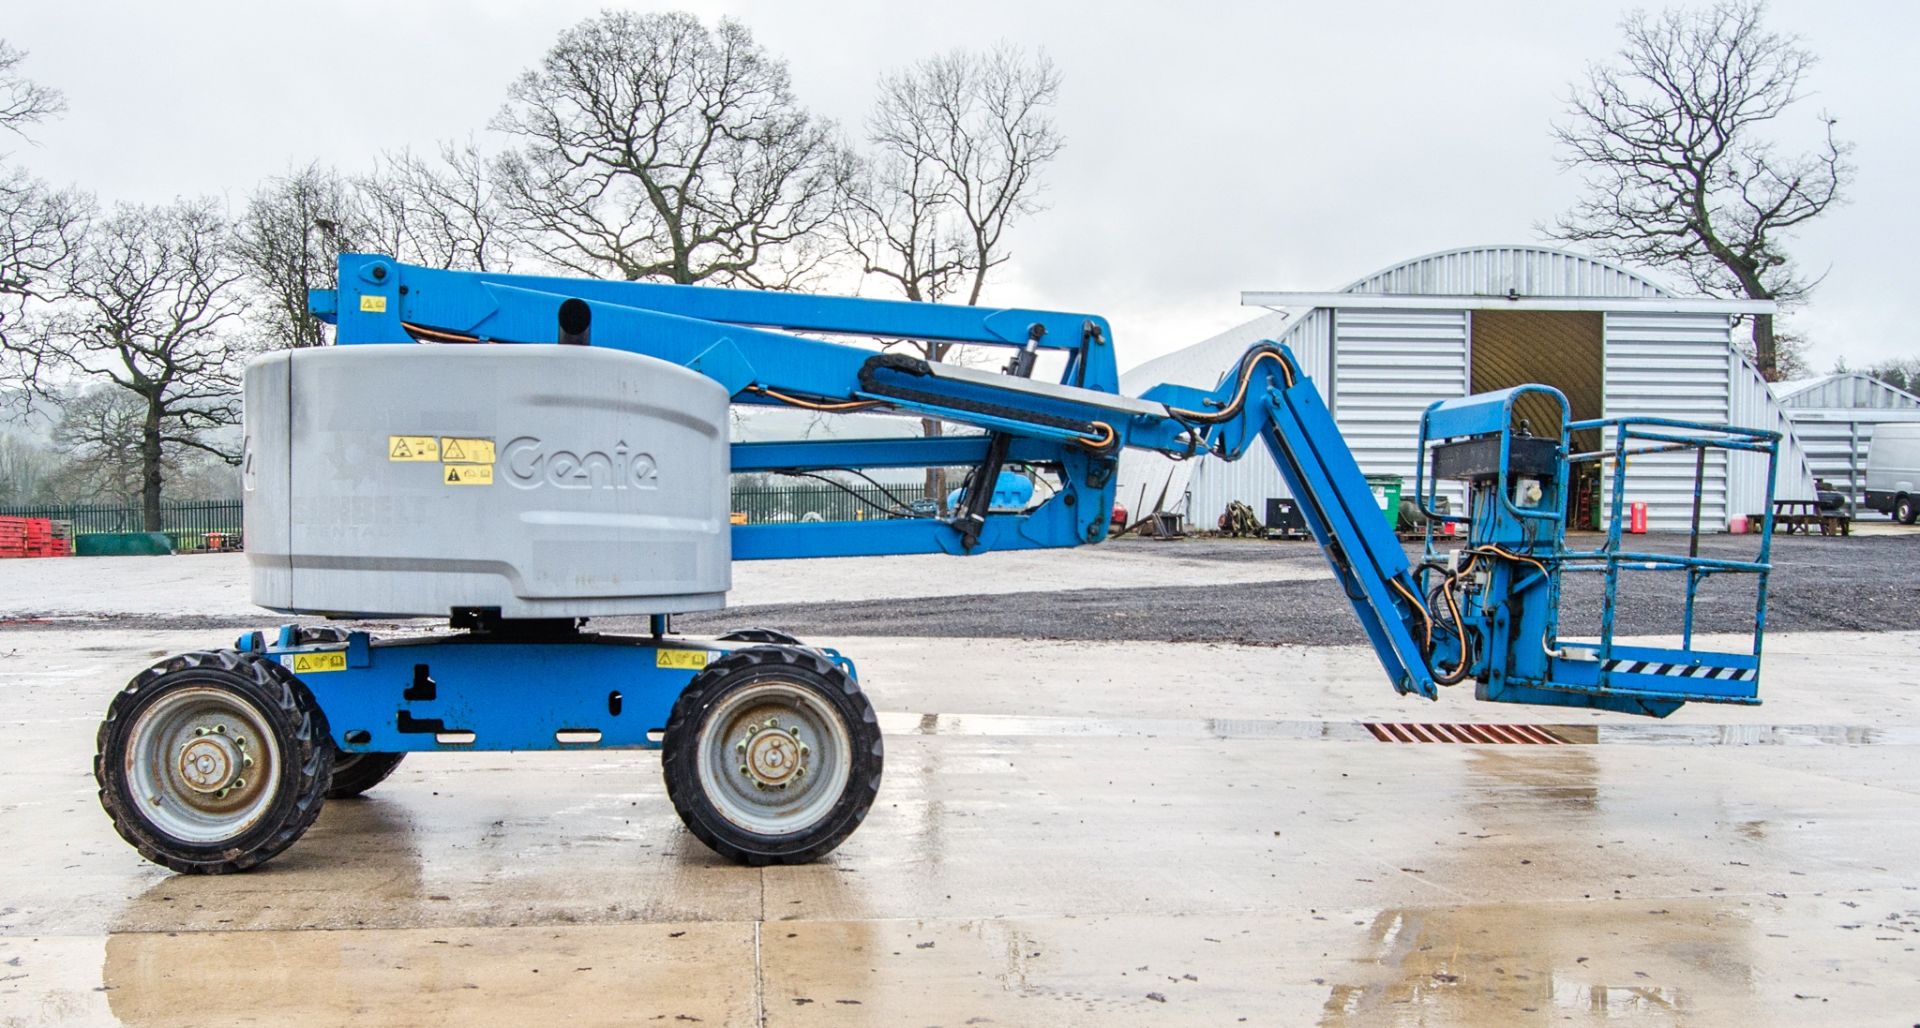 Genie Z45/25J diesel/battery electric 4 wheel drive articulated boom lift access platform Year: 2014 - Image 8 of 19